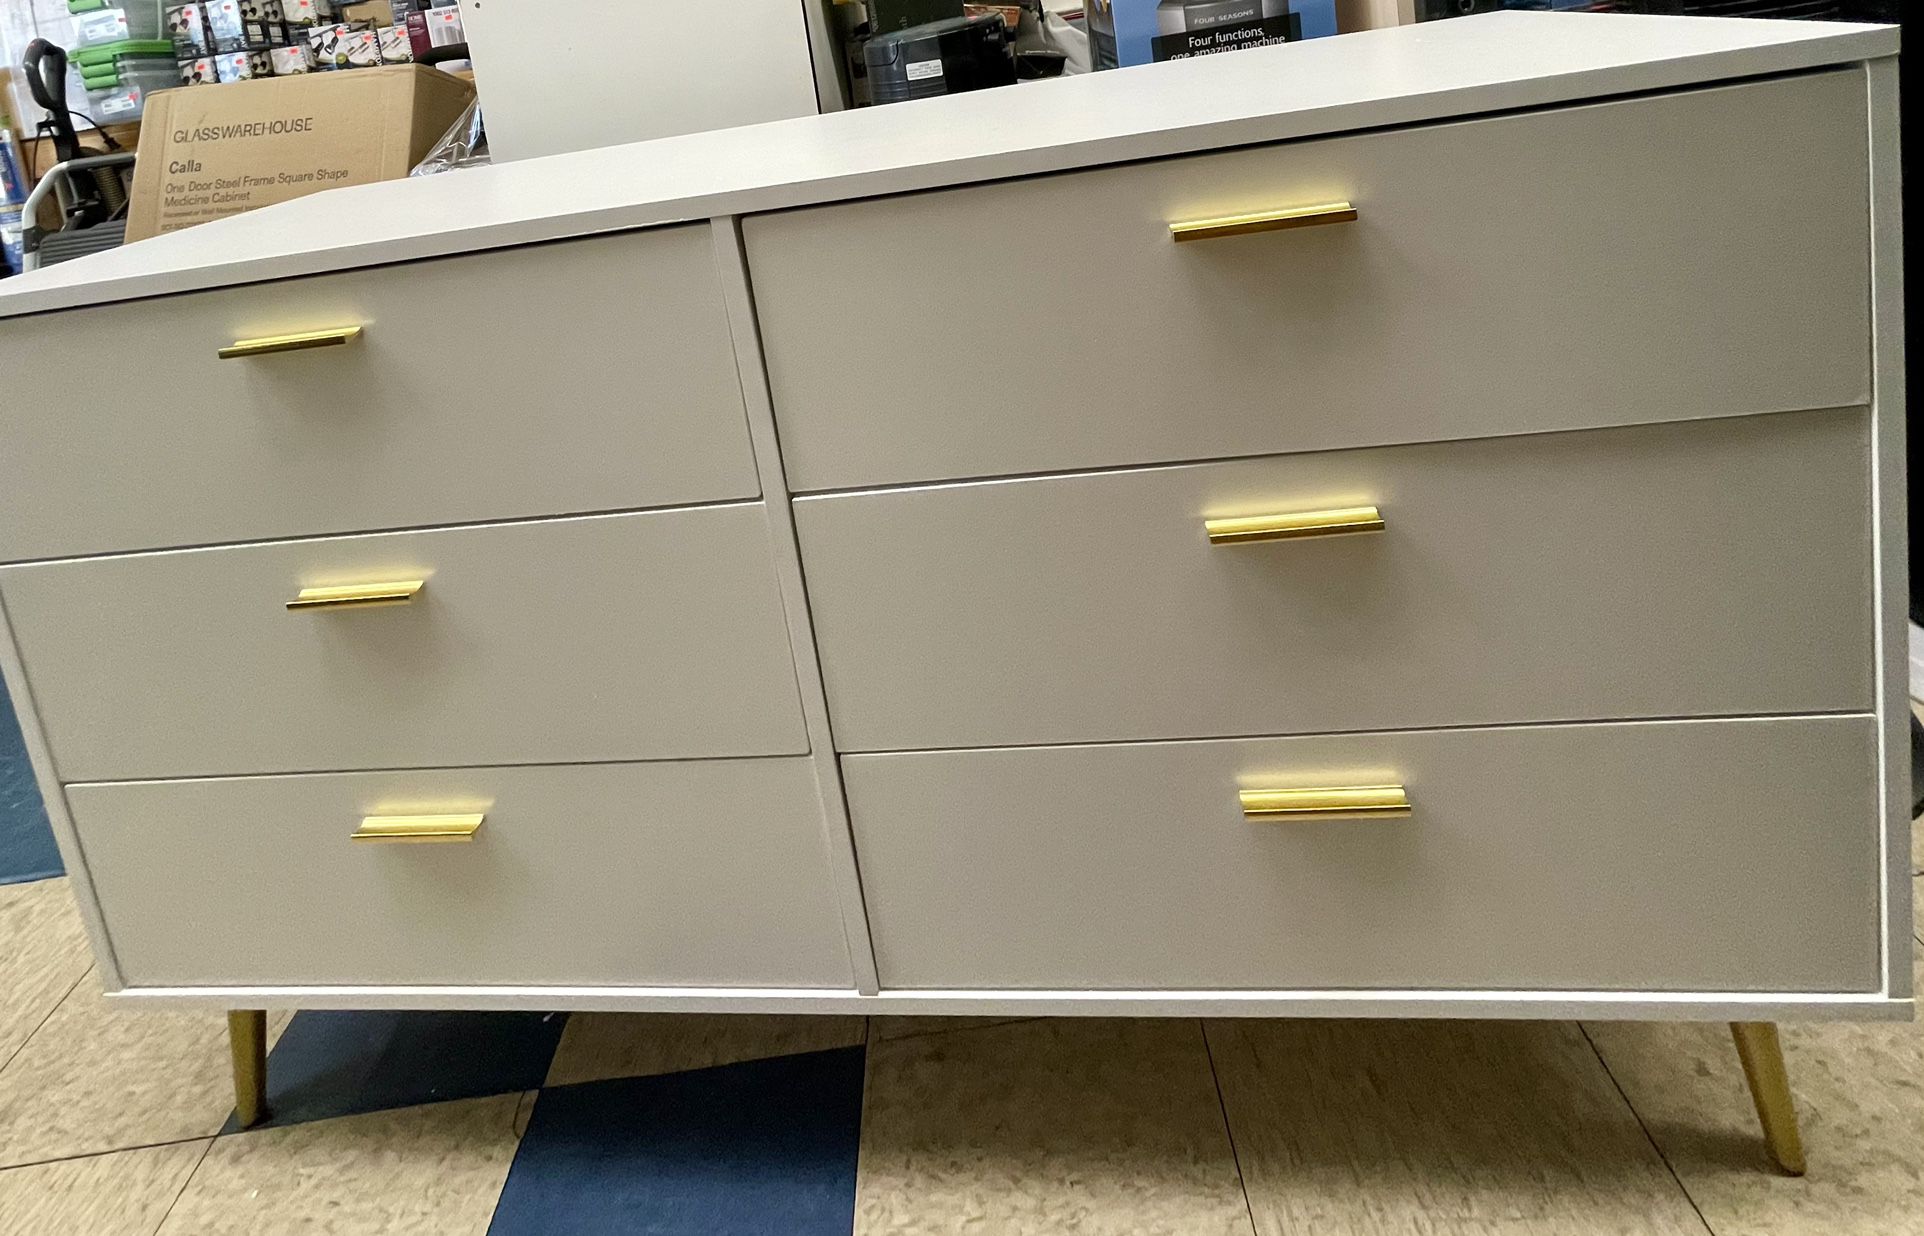 6 Drawer chest/ Dresser with Metal Legs 